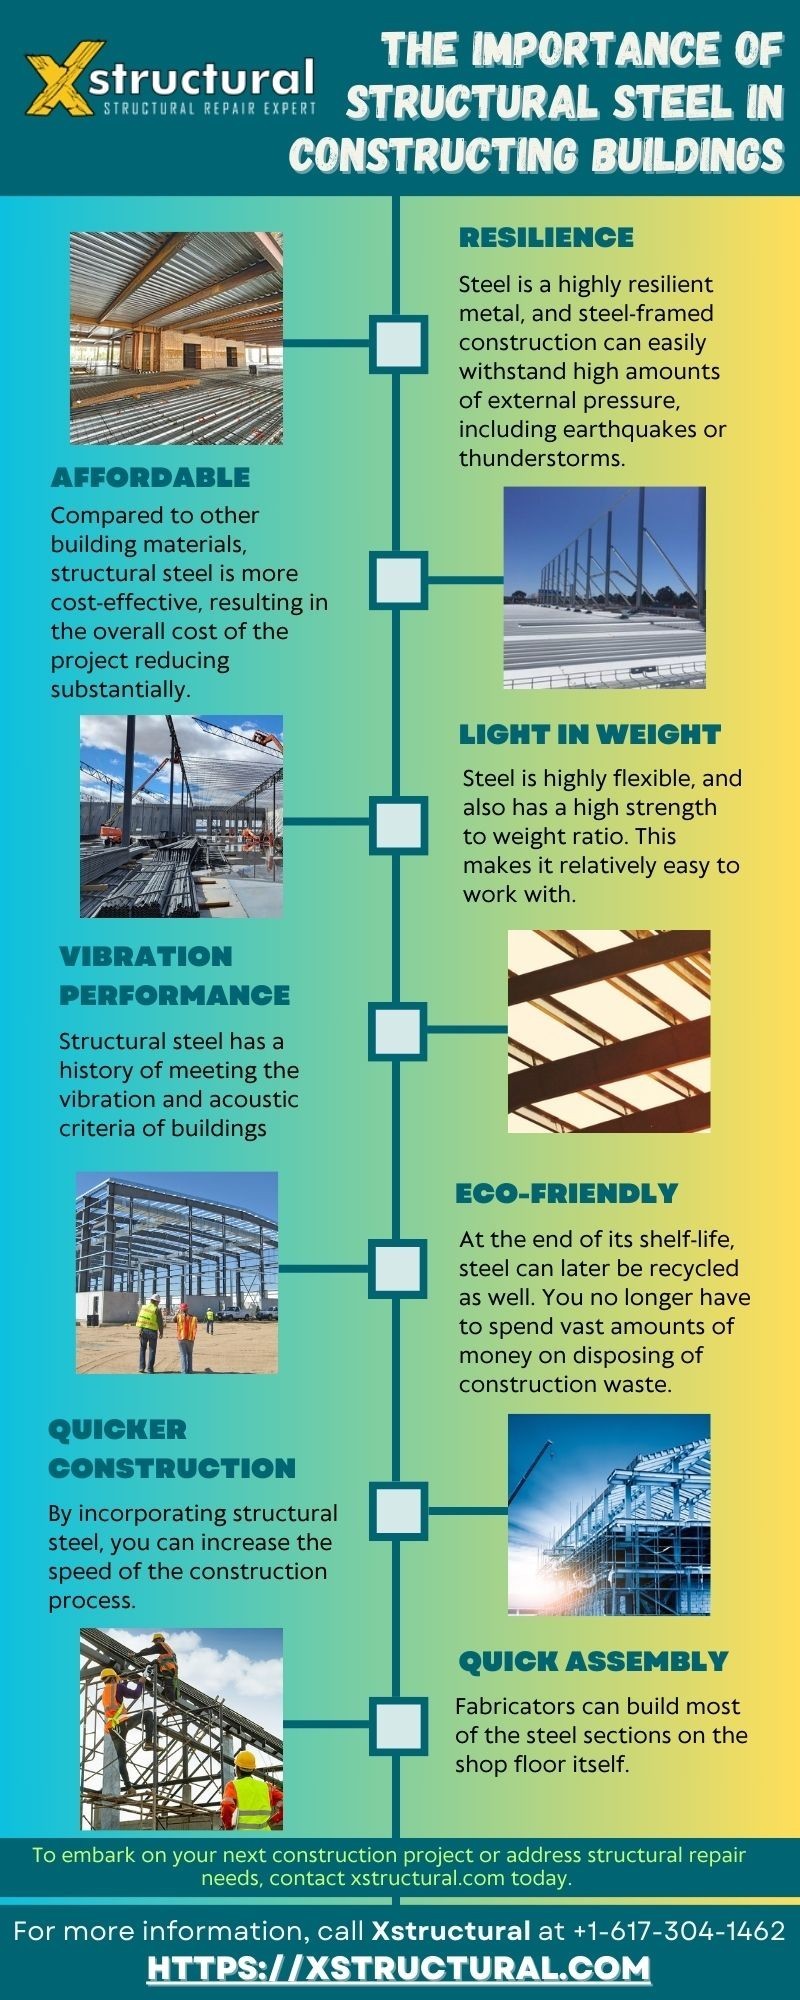 The Importance of Structural Steel in Constructing Buildings